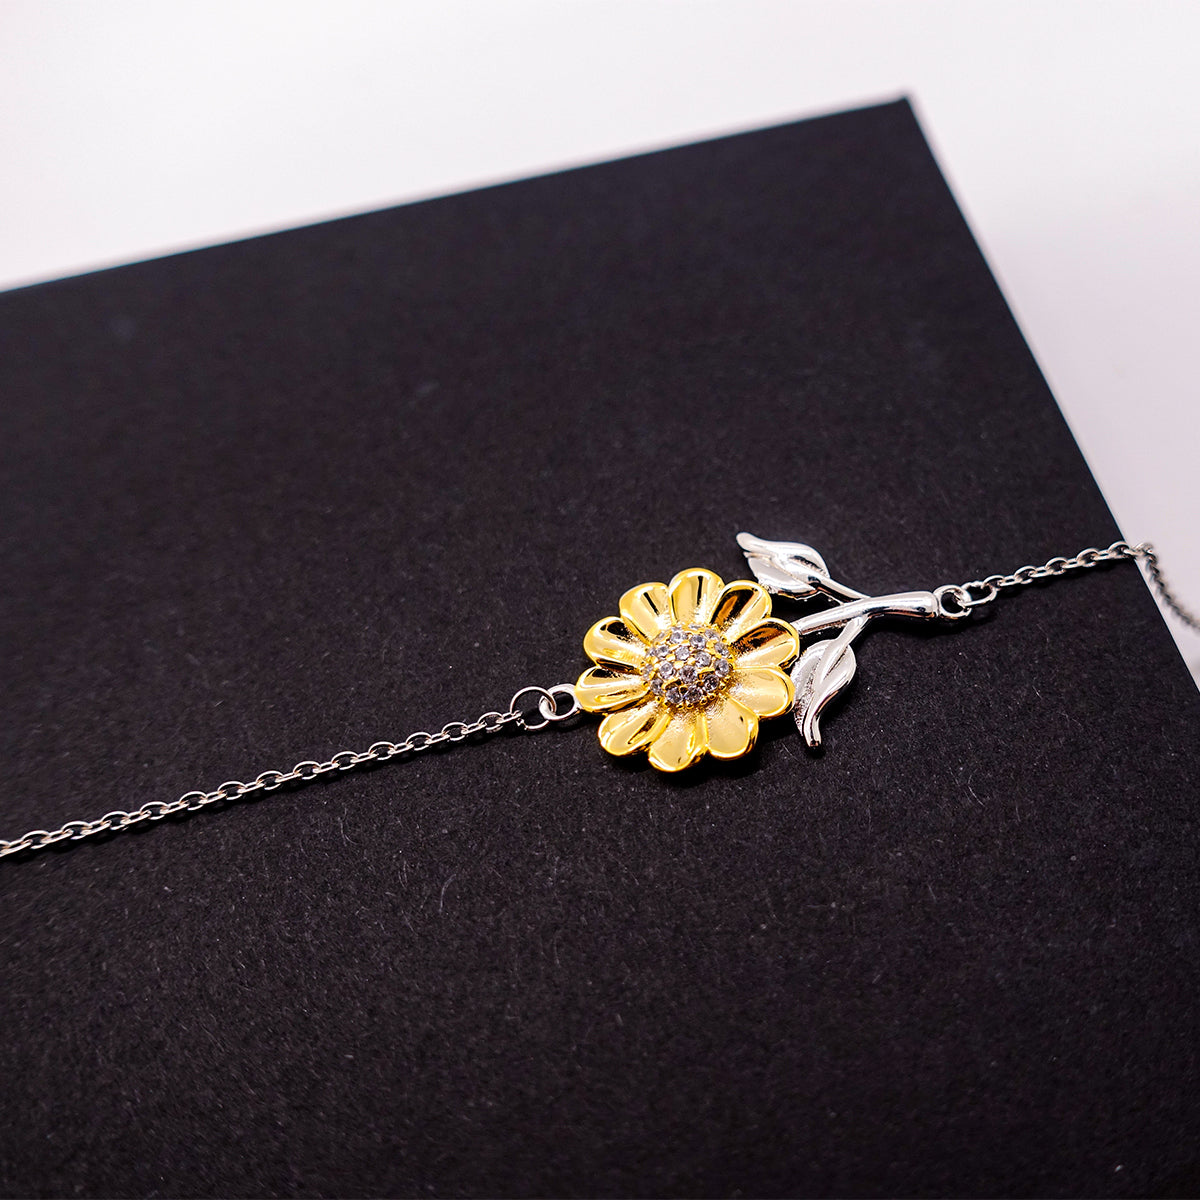 Daddy Sunflower Bracelet - Engraved Daddy, Youll Always Have a Special Place in My Heart - Unique Gift for Birthday, Holidays, Christmas, Graduation - Show Daddy Your Love and Appreciation